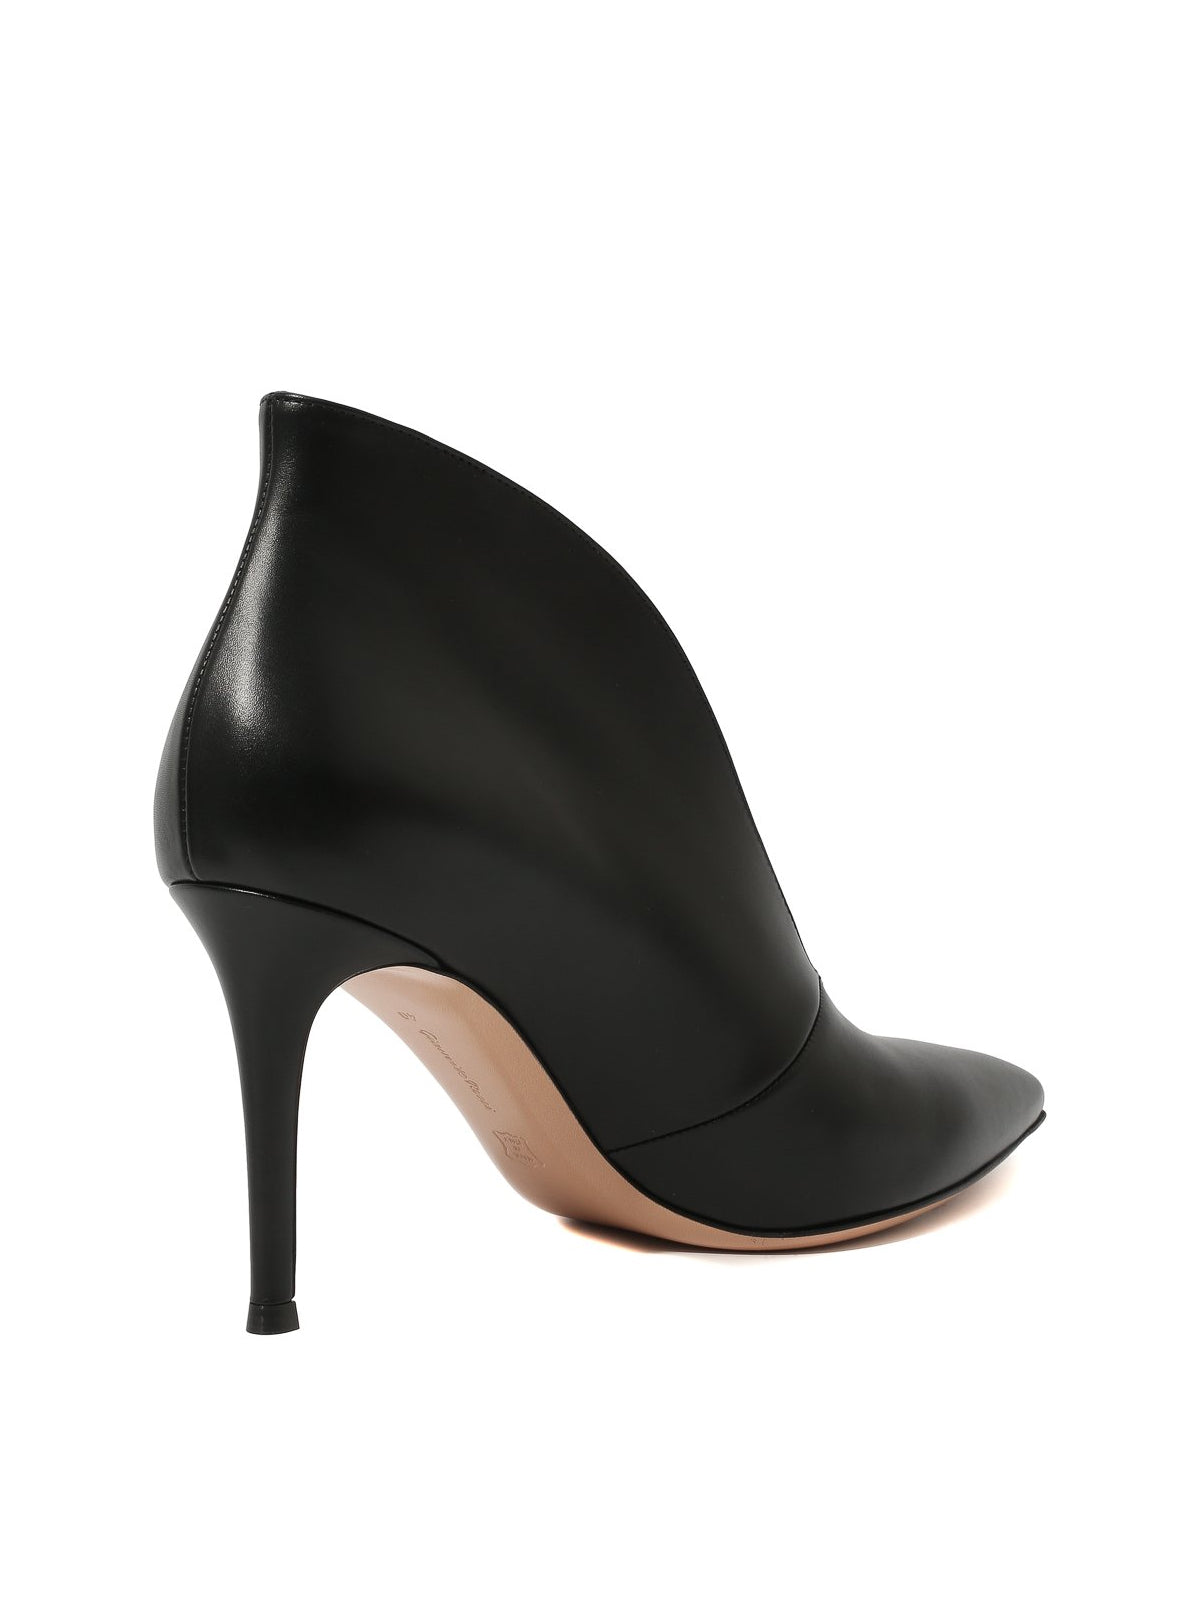 Gianvito Rossi-OUTLET-SALE-Vania 85 Ankle Boots-ARCHIVIST